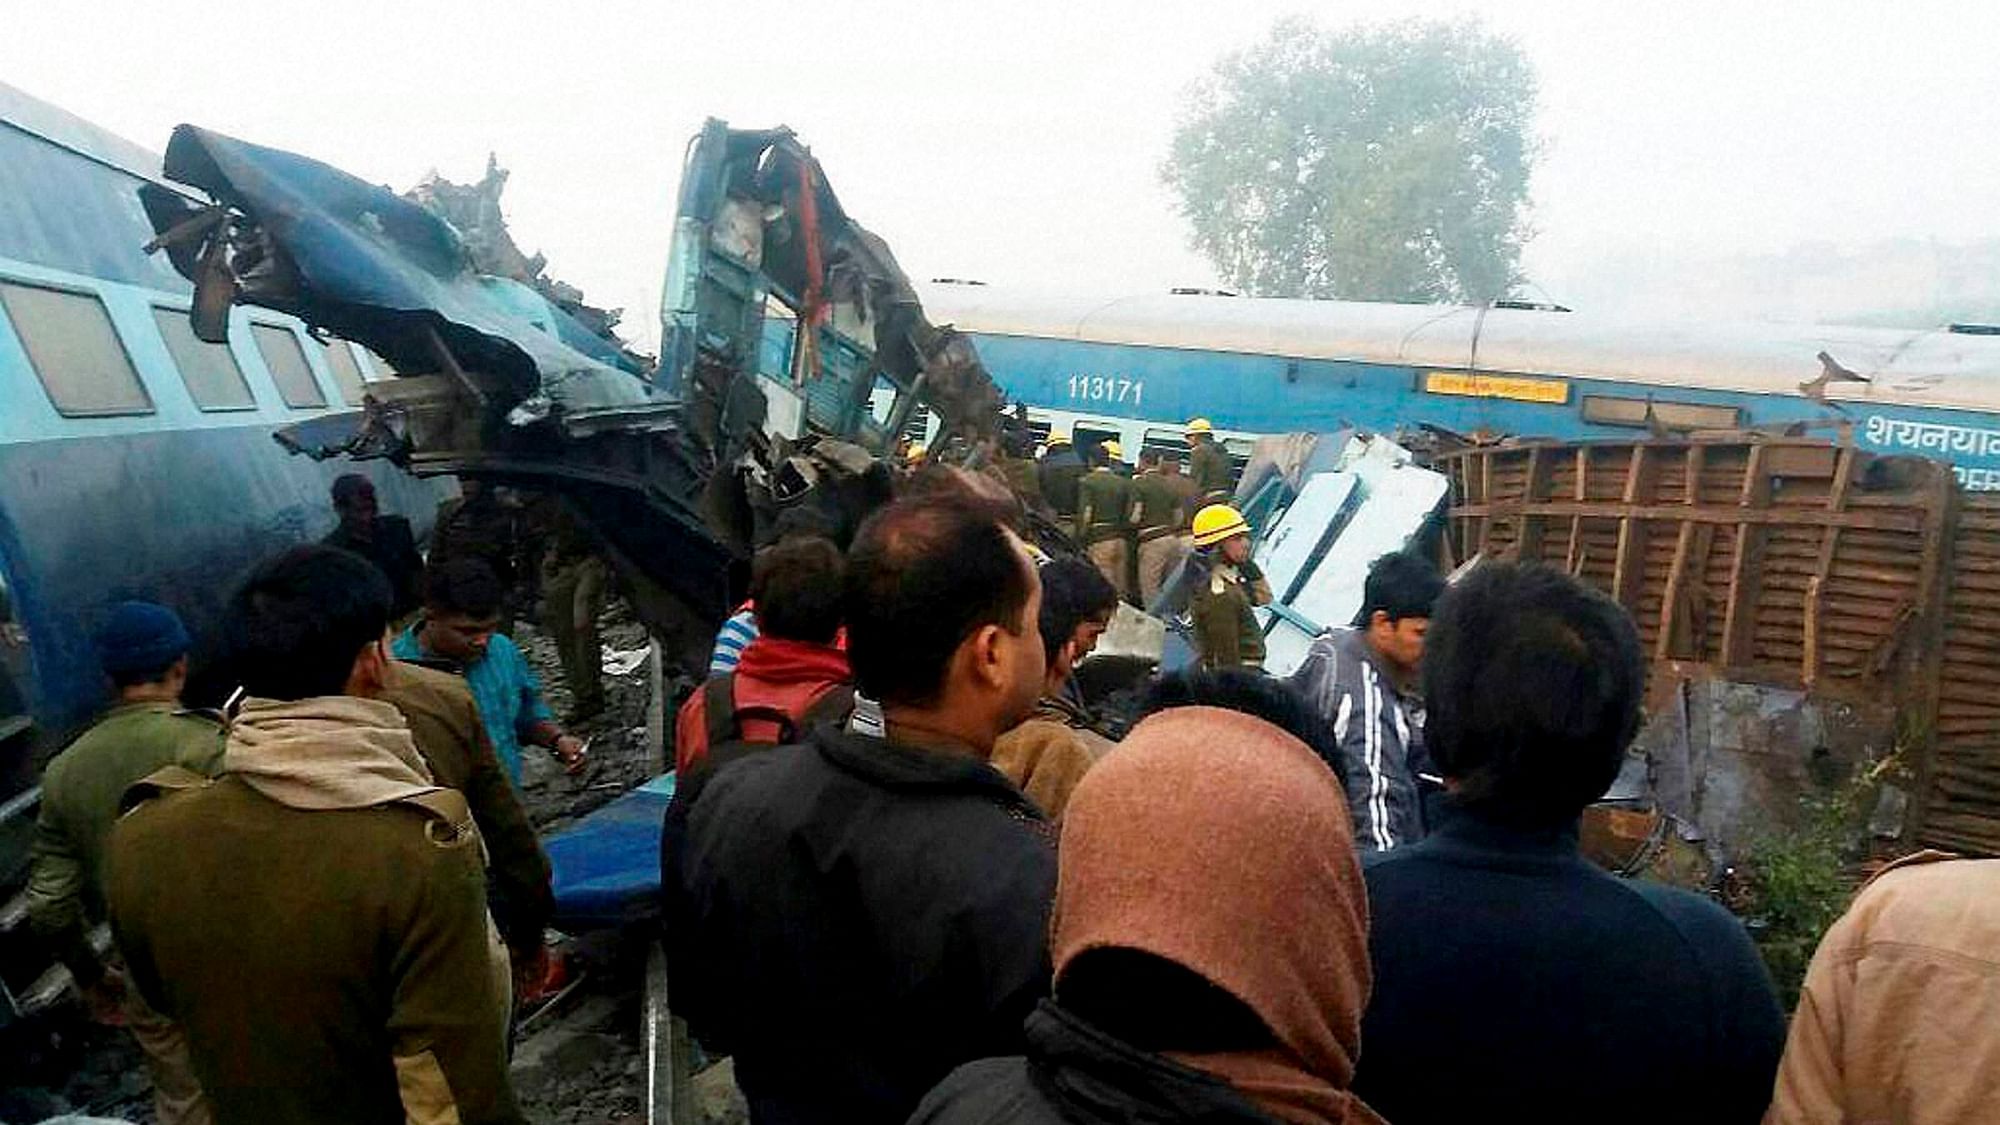 According to media reports, Bihar police arrested a man who ‘’was paid by the ISI to cause the train derailment’. (Photo: PTI)